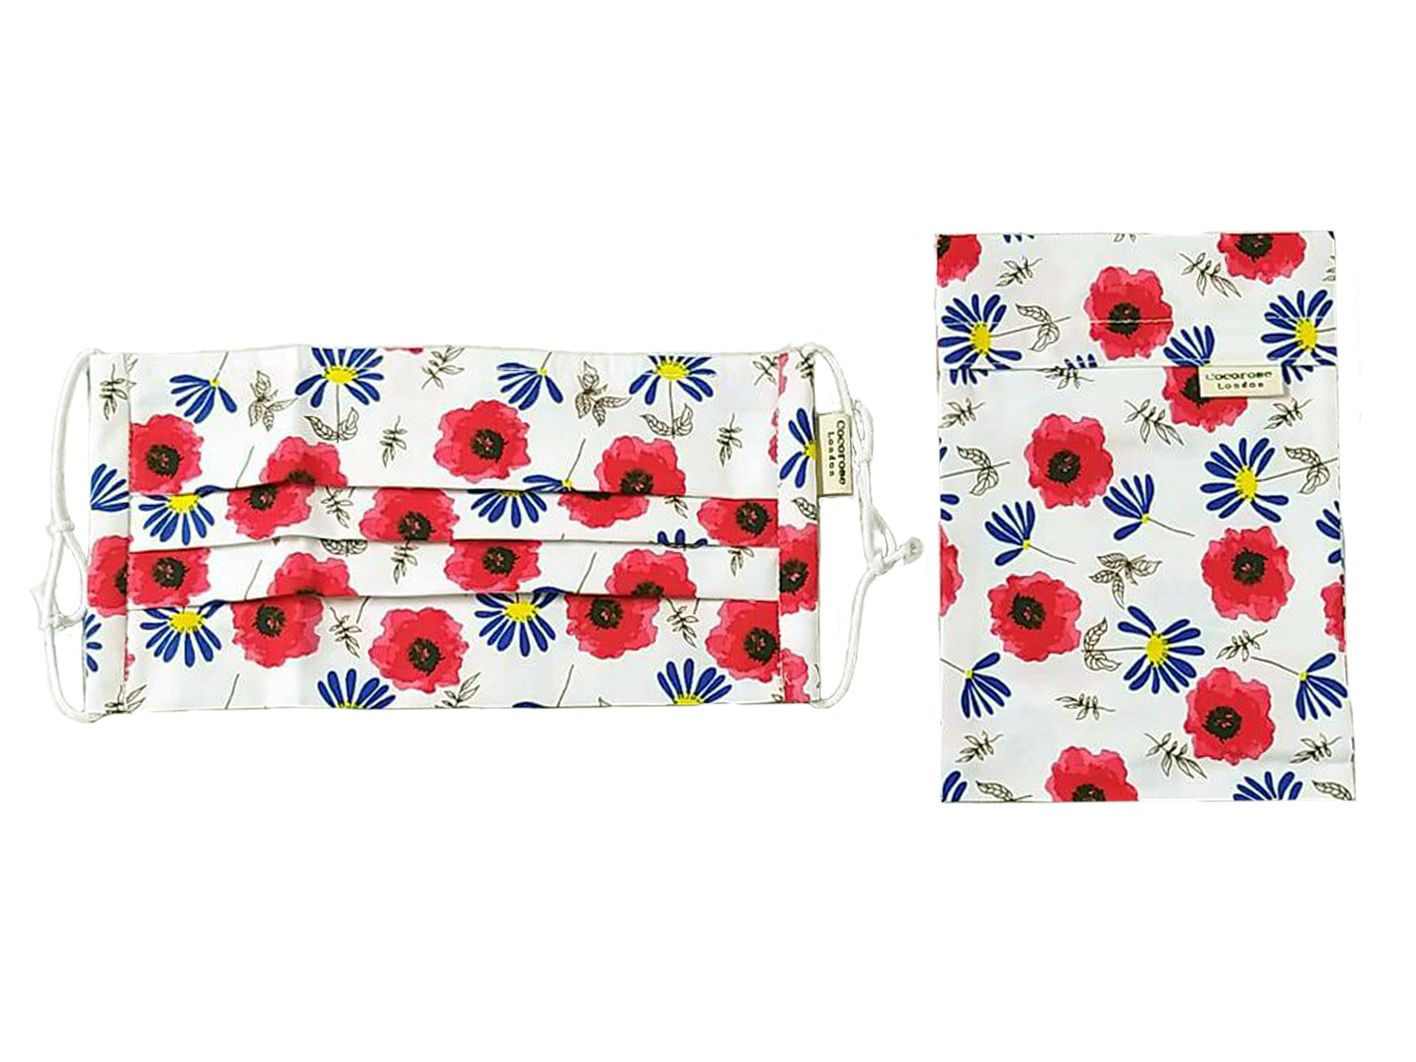 Poppies & blue daisies cotton pleated face mask from Cocorose London